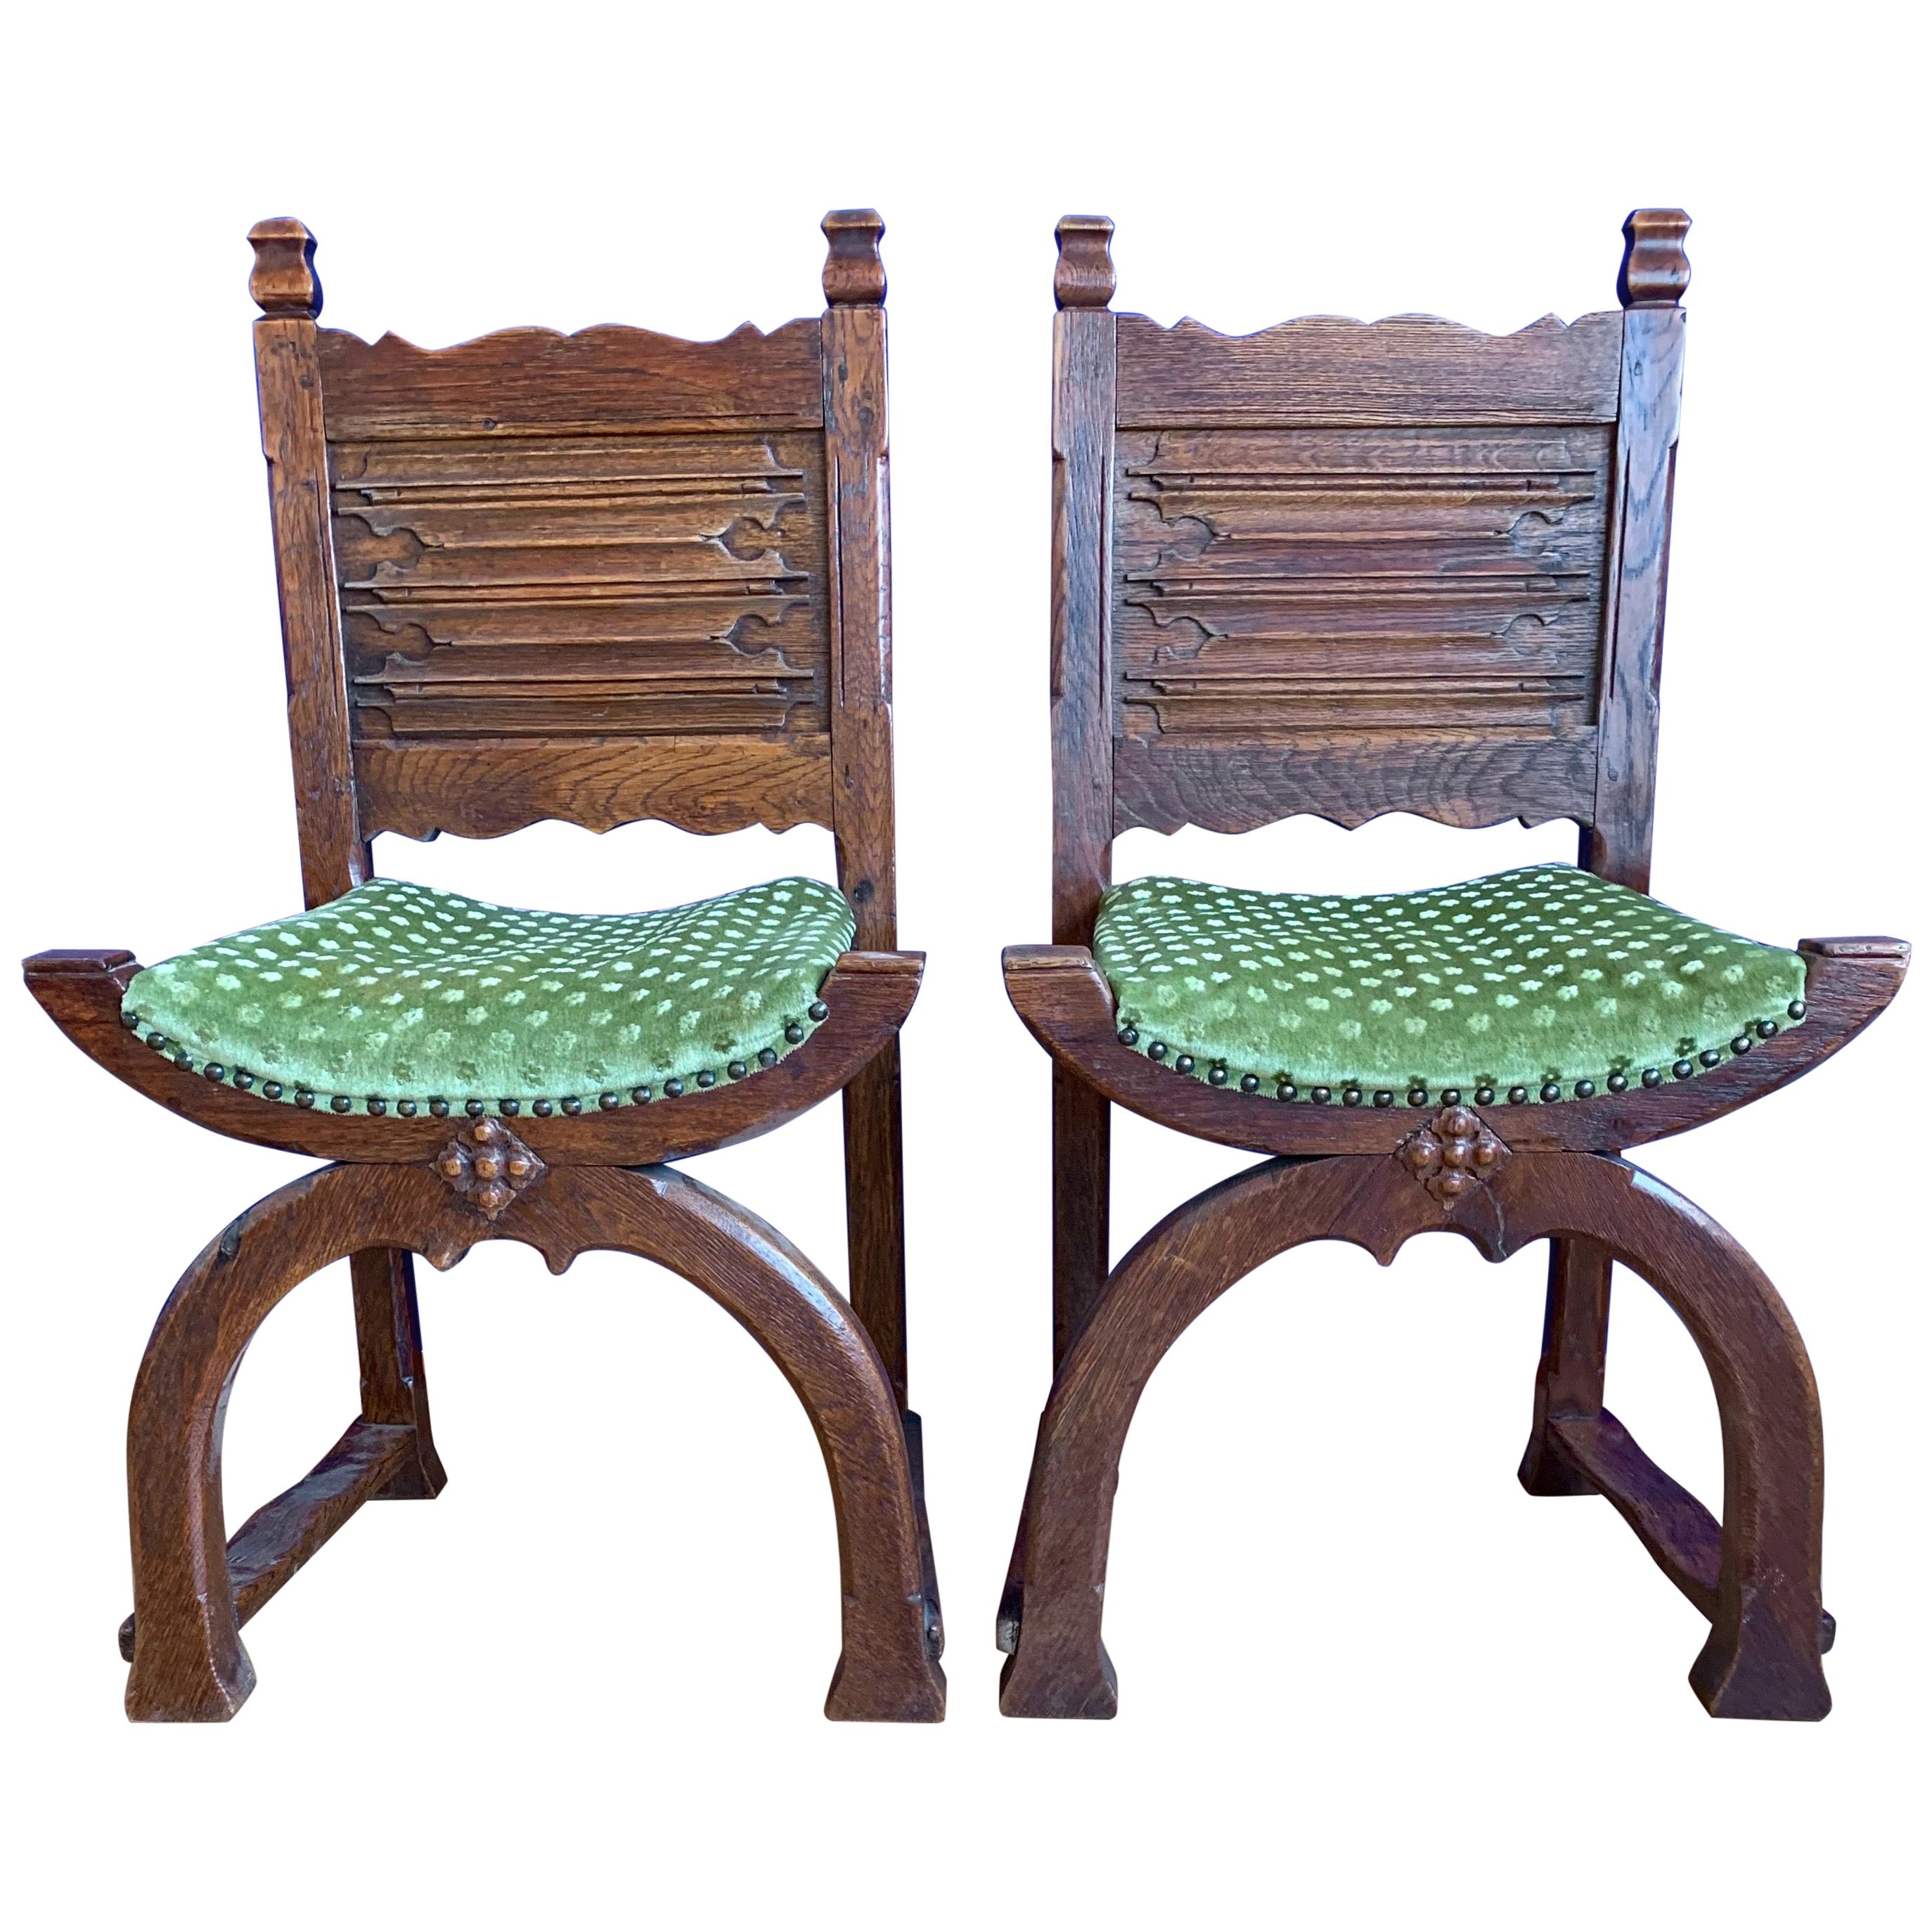 Rare Antique Pair of Gothic Revival and Medieval Style Cloister or Church Chairs For Sale